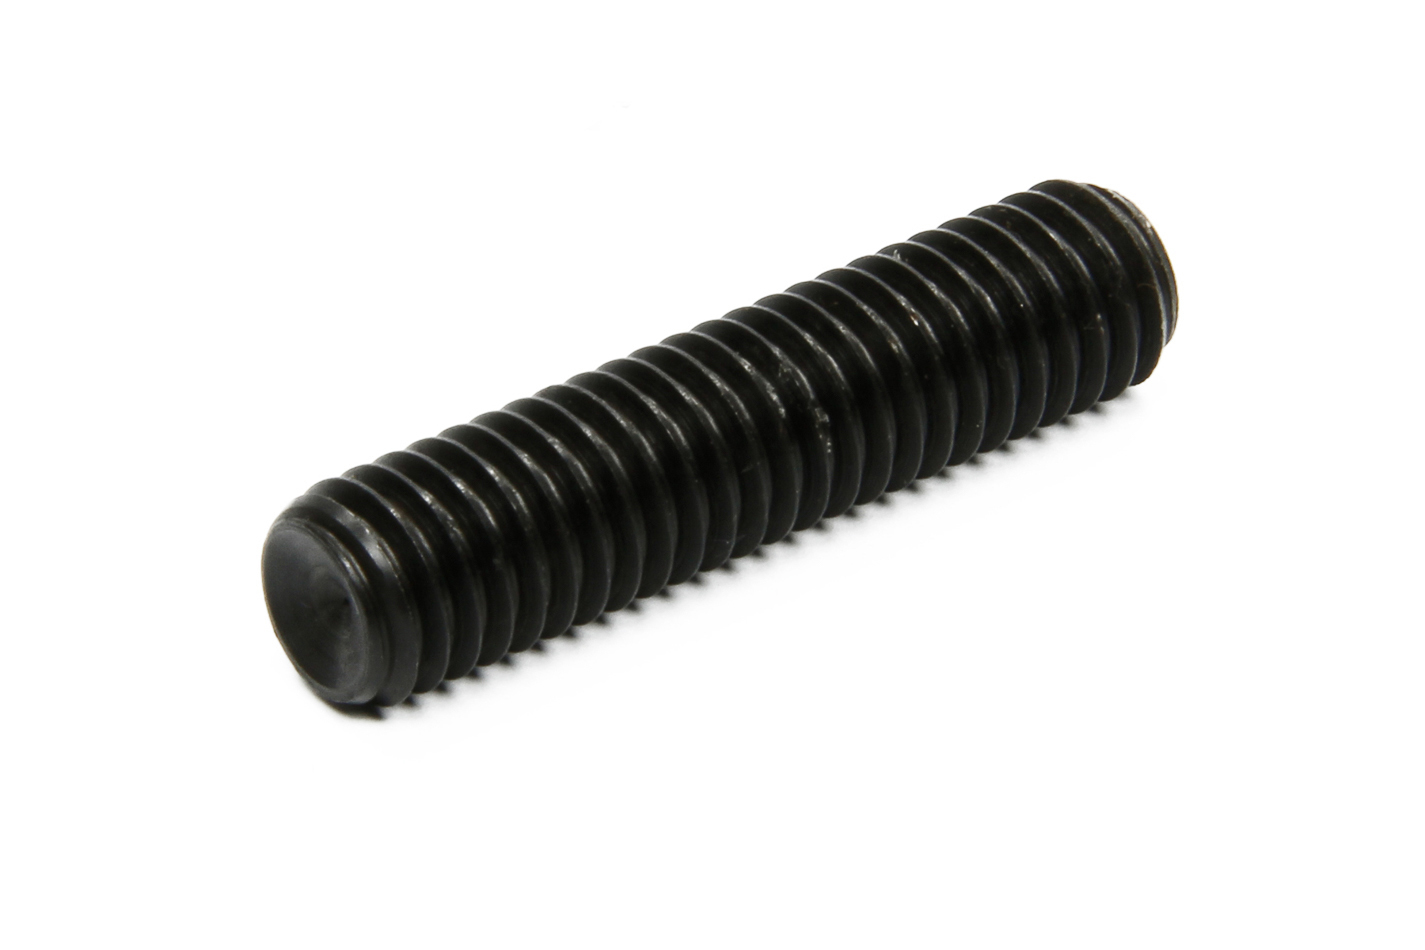 Tiger Quick Change 2307 Gear Cover Stud, 3/8-16 in Thread, 1-1/2 in Long, Steel, Black Oxide, Tiger Quick Change, Each